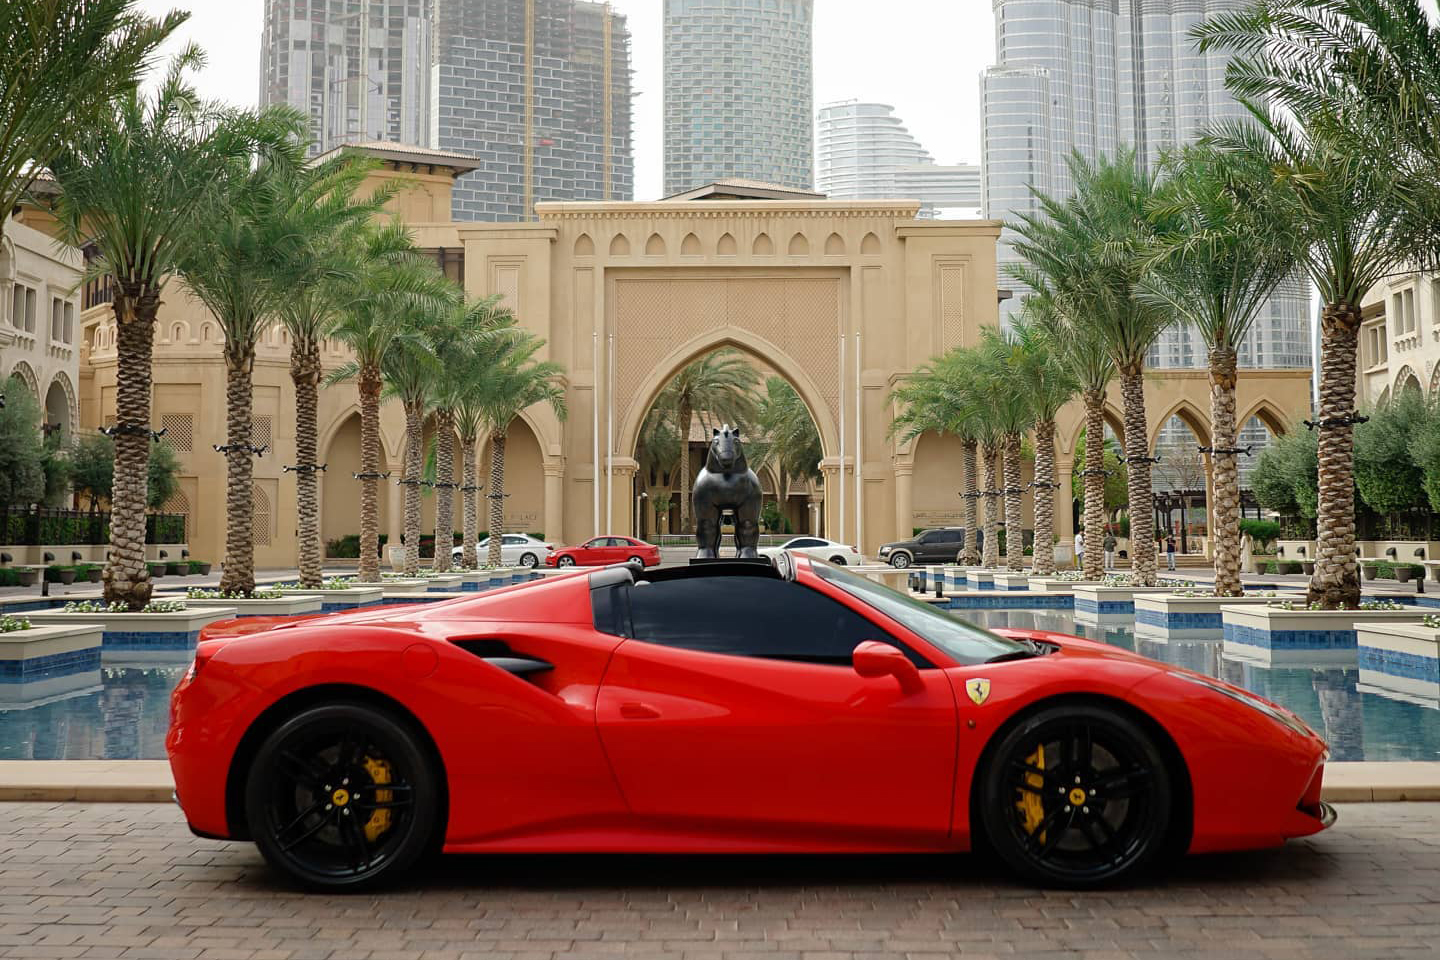 All You Need to Know About Car Rental in Dubai